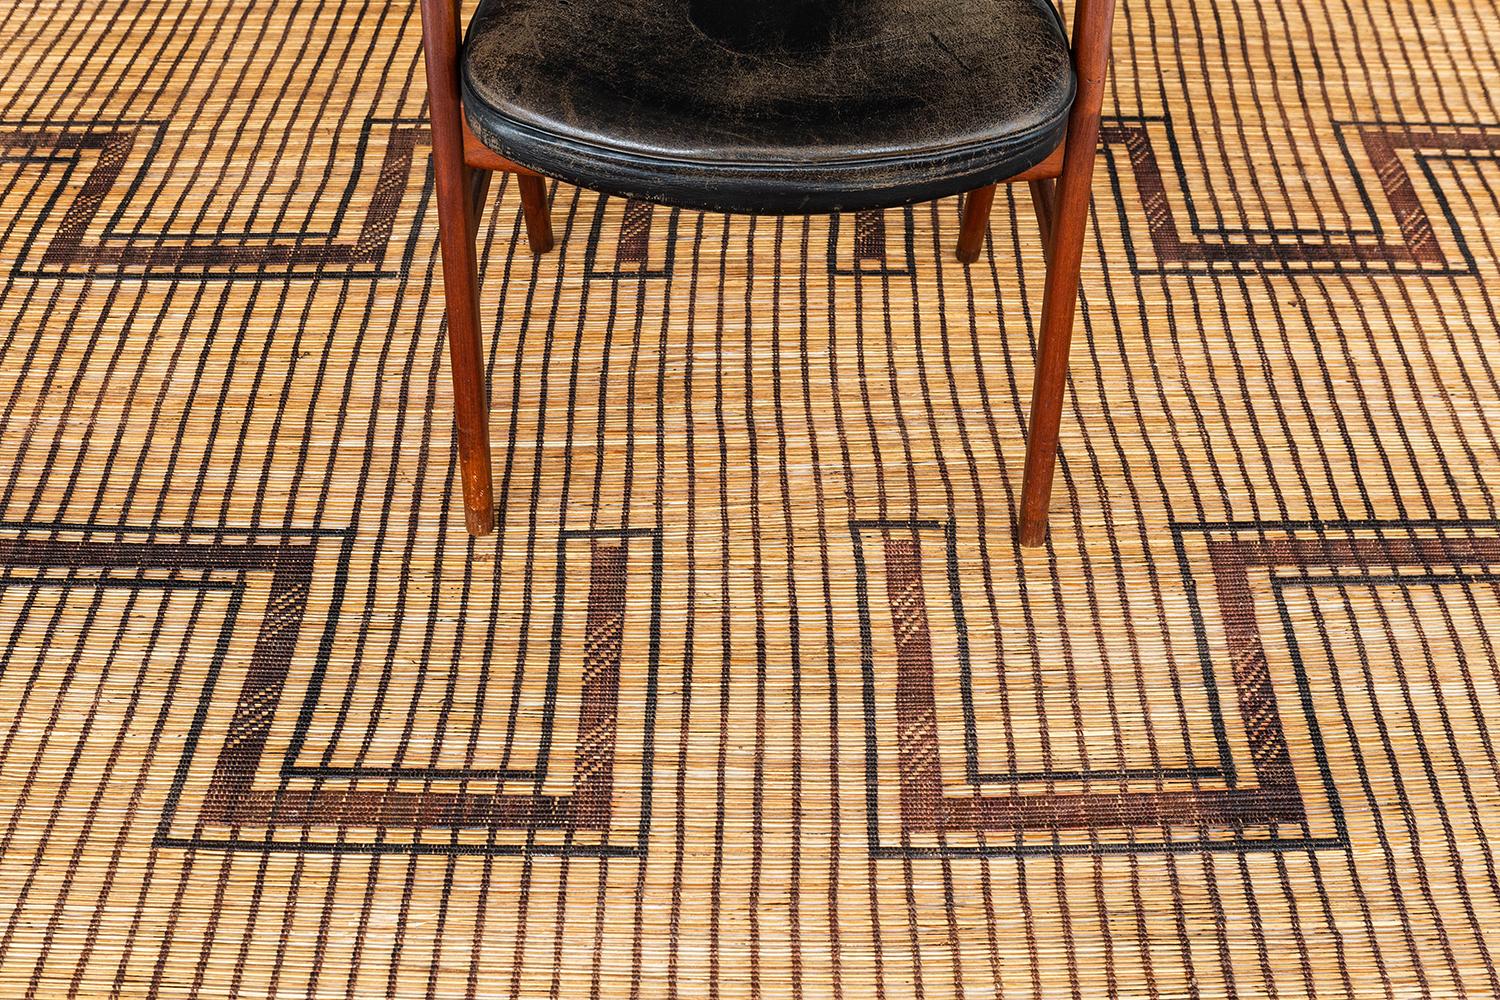 A beautiful and unique vintage Tuareg. This piece is handwoven of reed and leather by one of the oldest nomadic groups of the Saharan trade routes, the Tuaregs. This piece will elevate any design space with its tribal design and eyecatching texture.